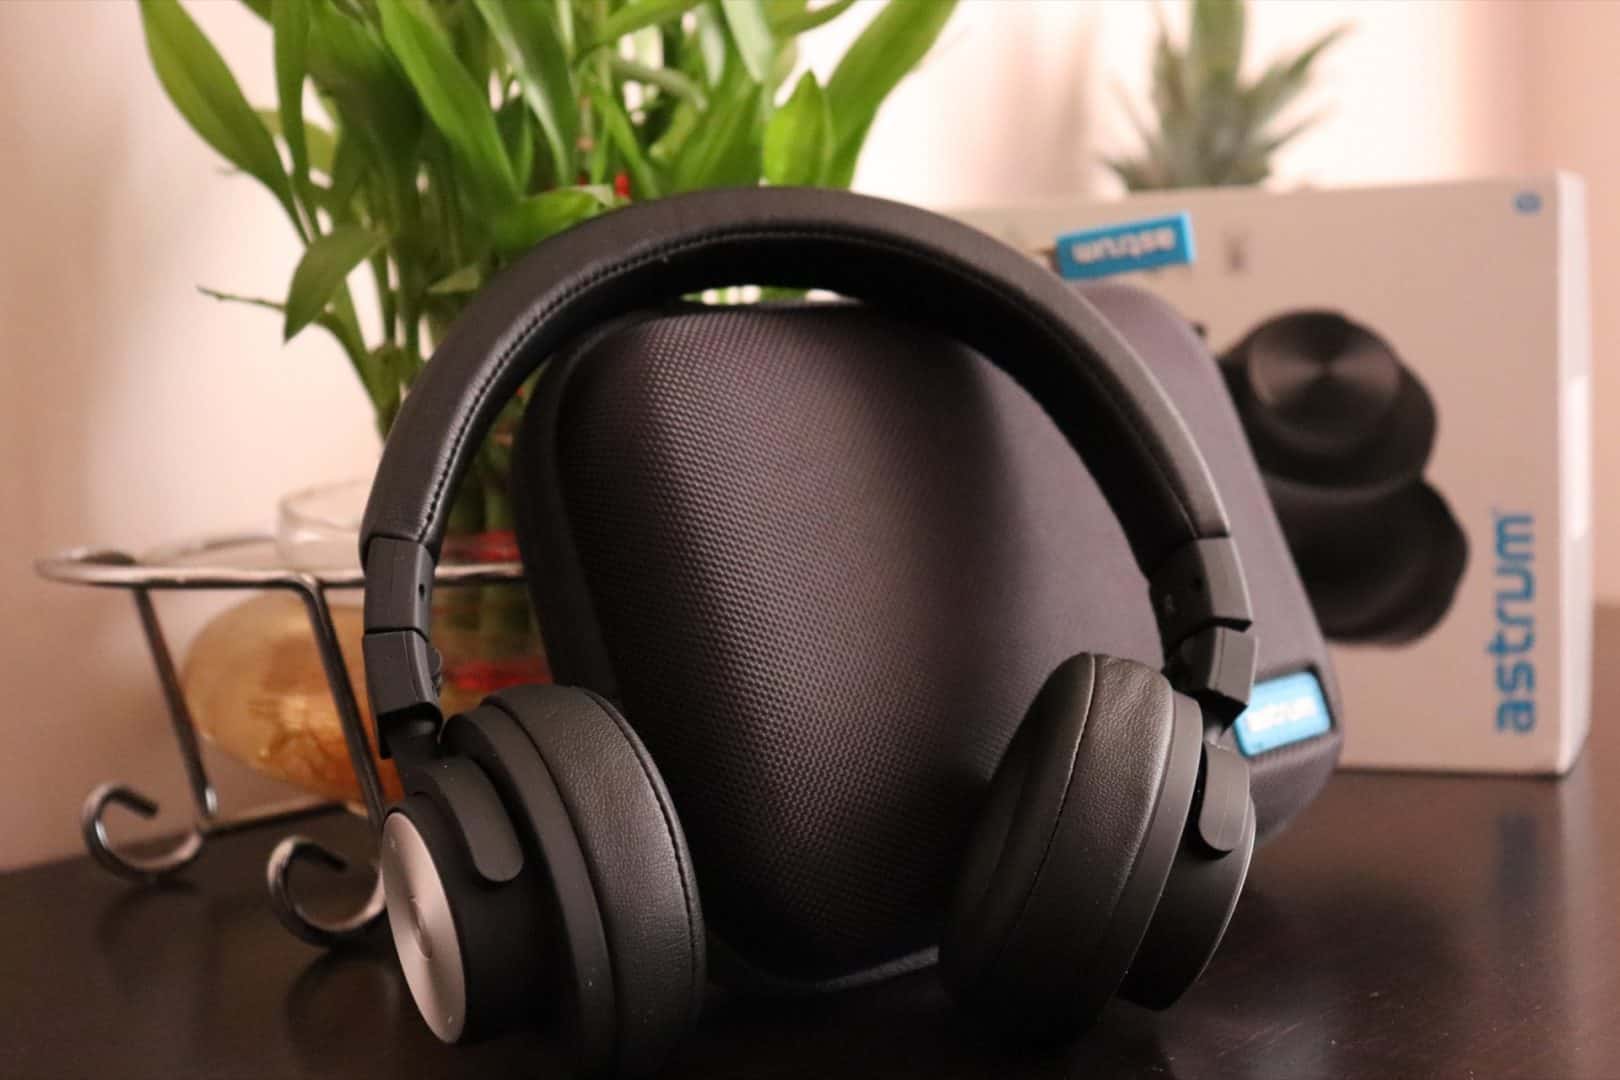 Astrum HT600 Wireless Stereo Headphones Review - The Minimalistic Headphone which you can carry around! - 9